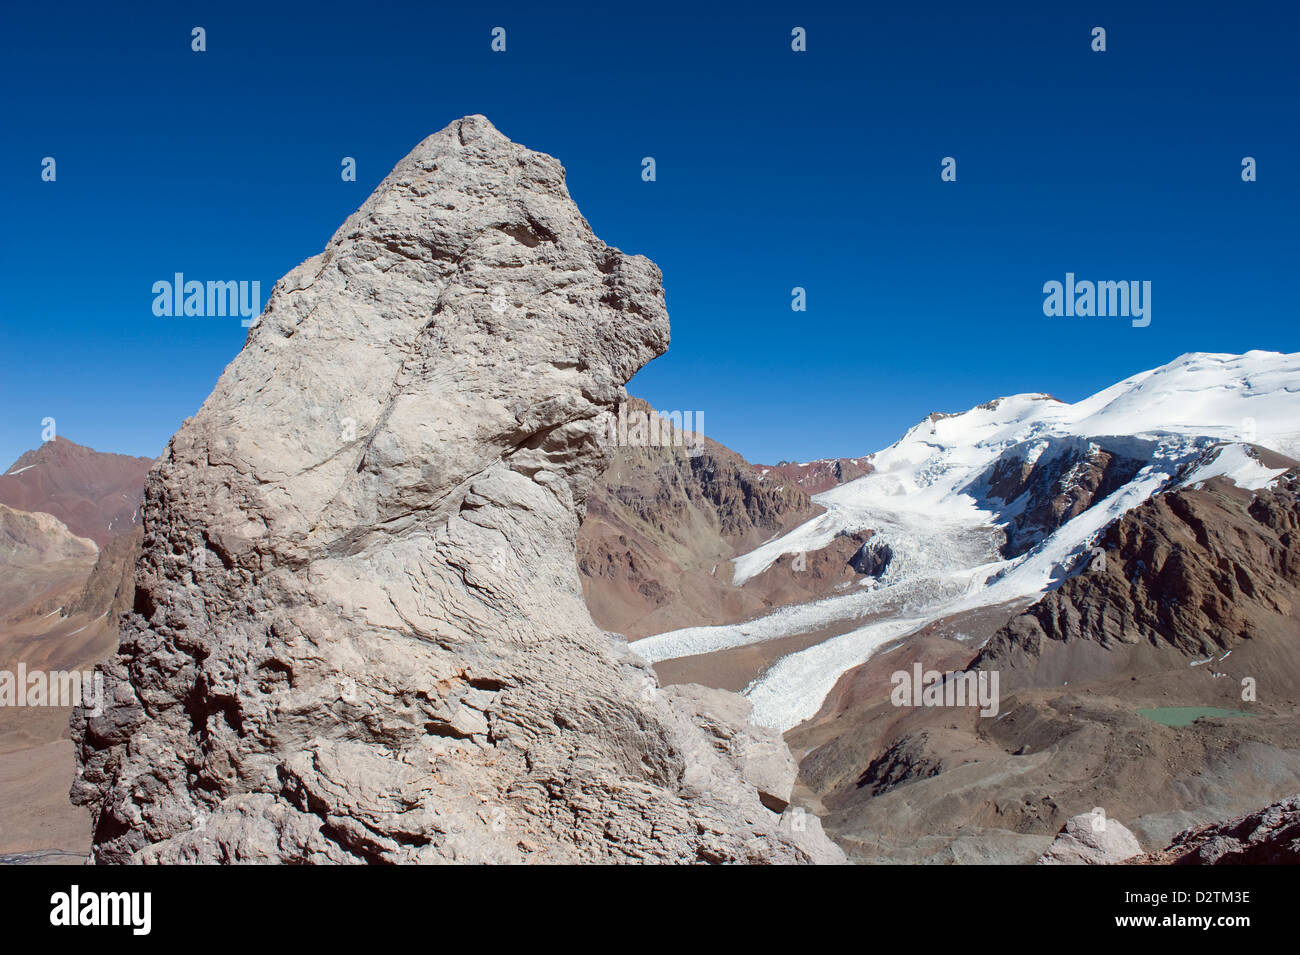 Aconcagua Provincial Park, the Andes mountains, Argentina, South America Stock Photo